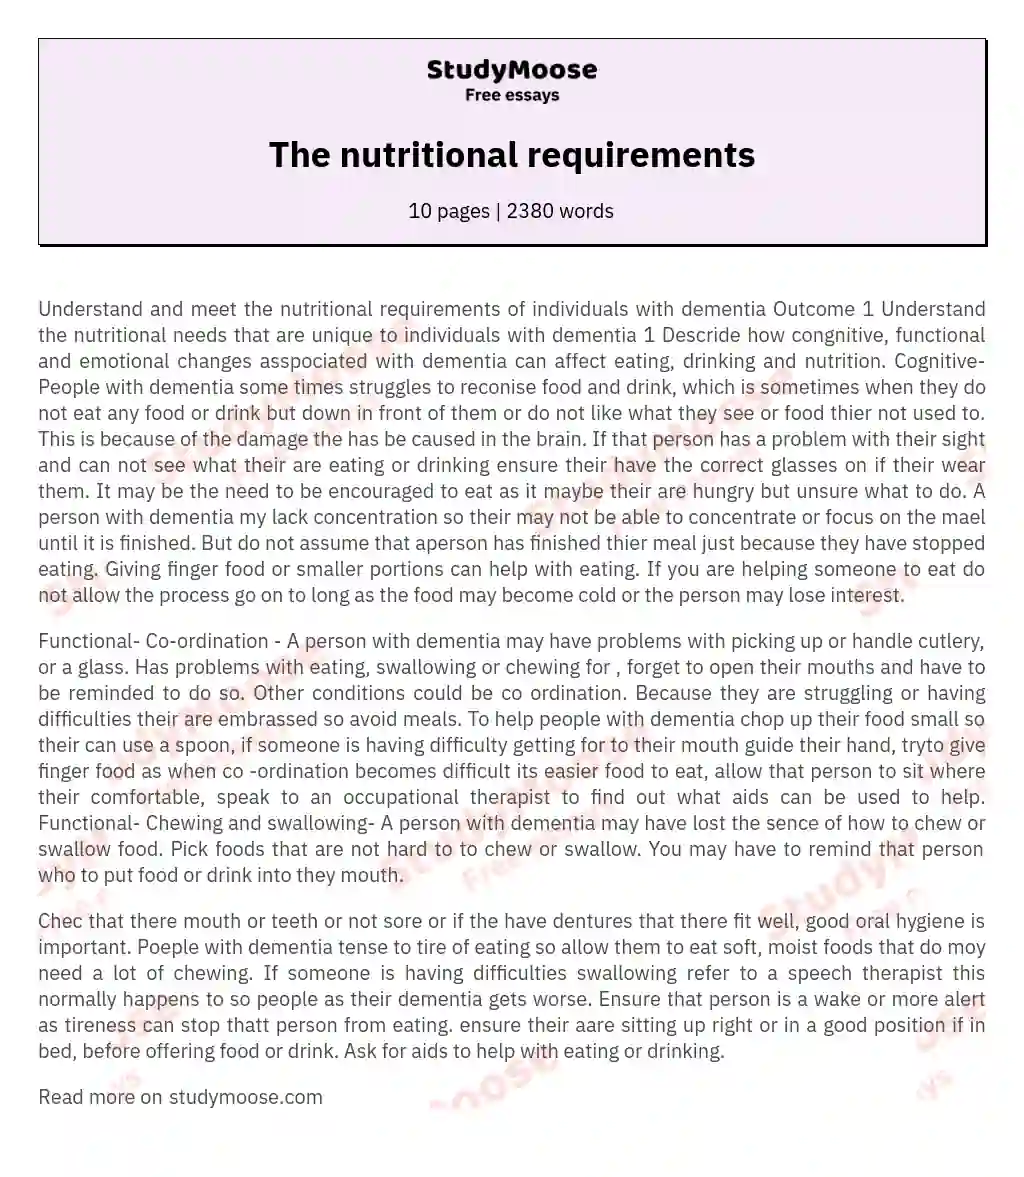 The nutritional requirements essay